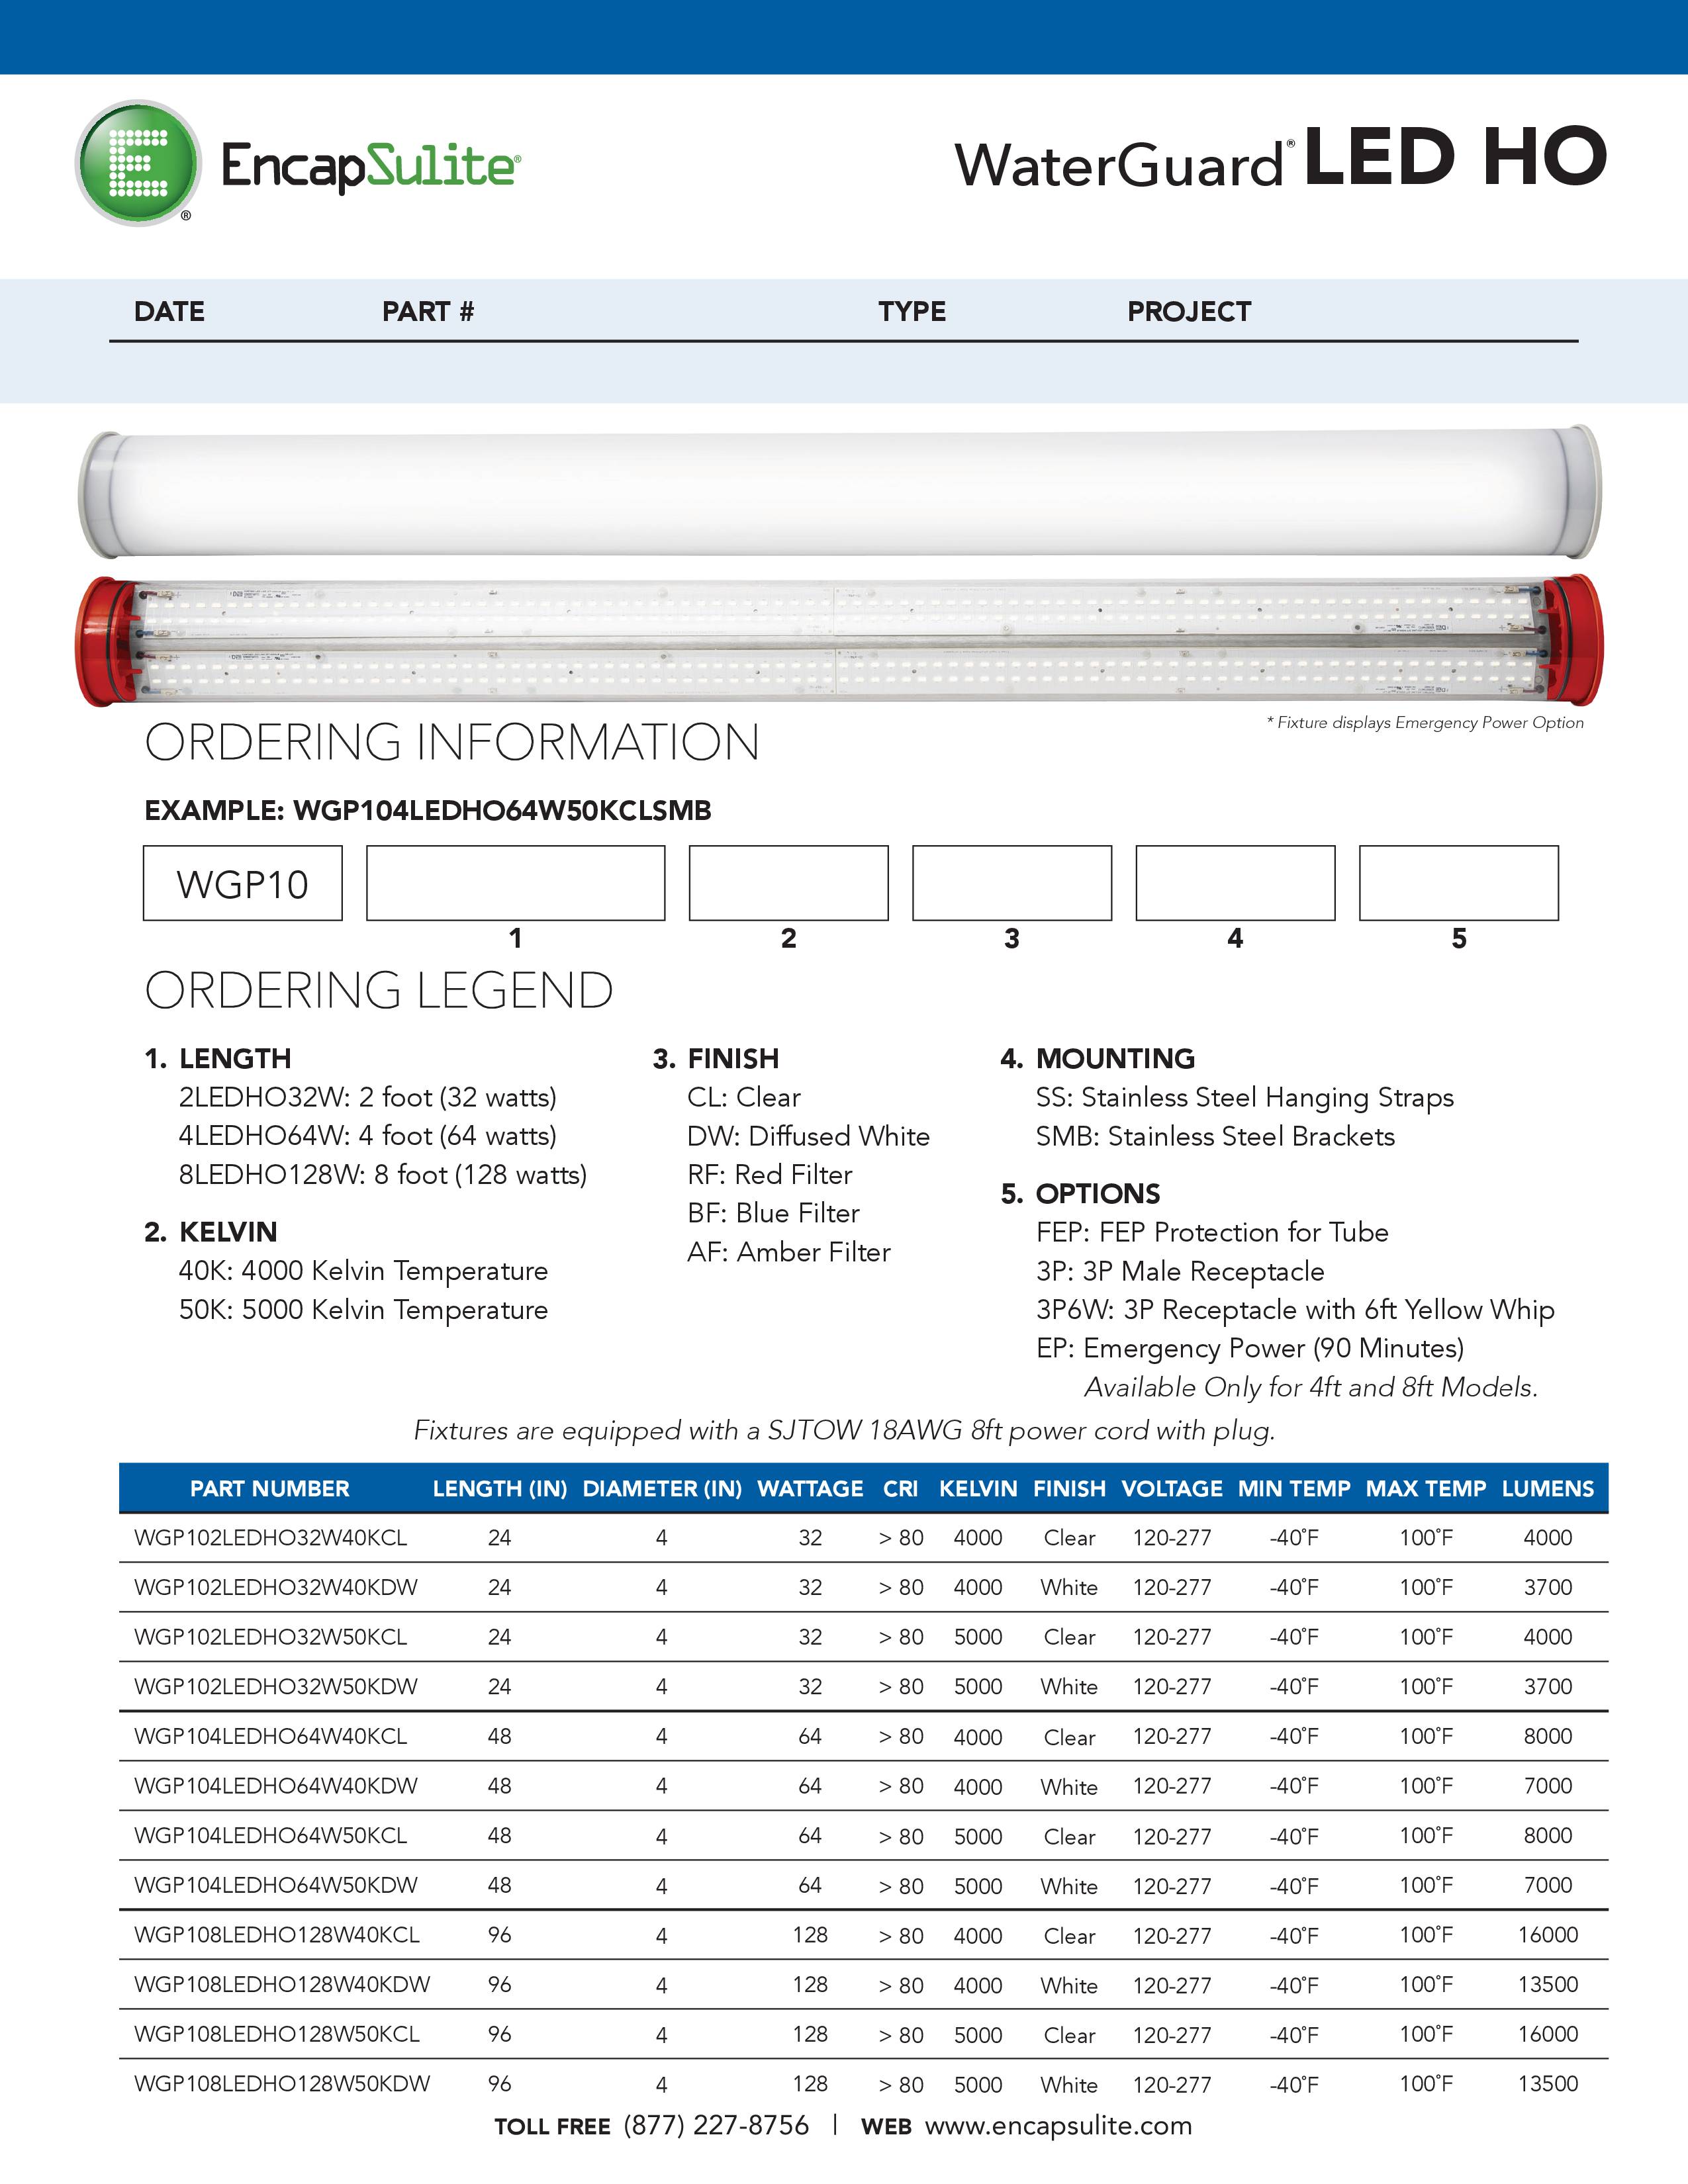 WaterGuard LED HO Specification